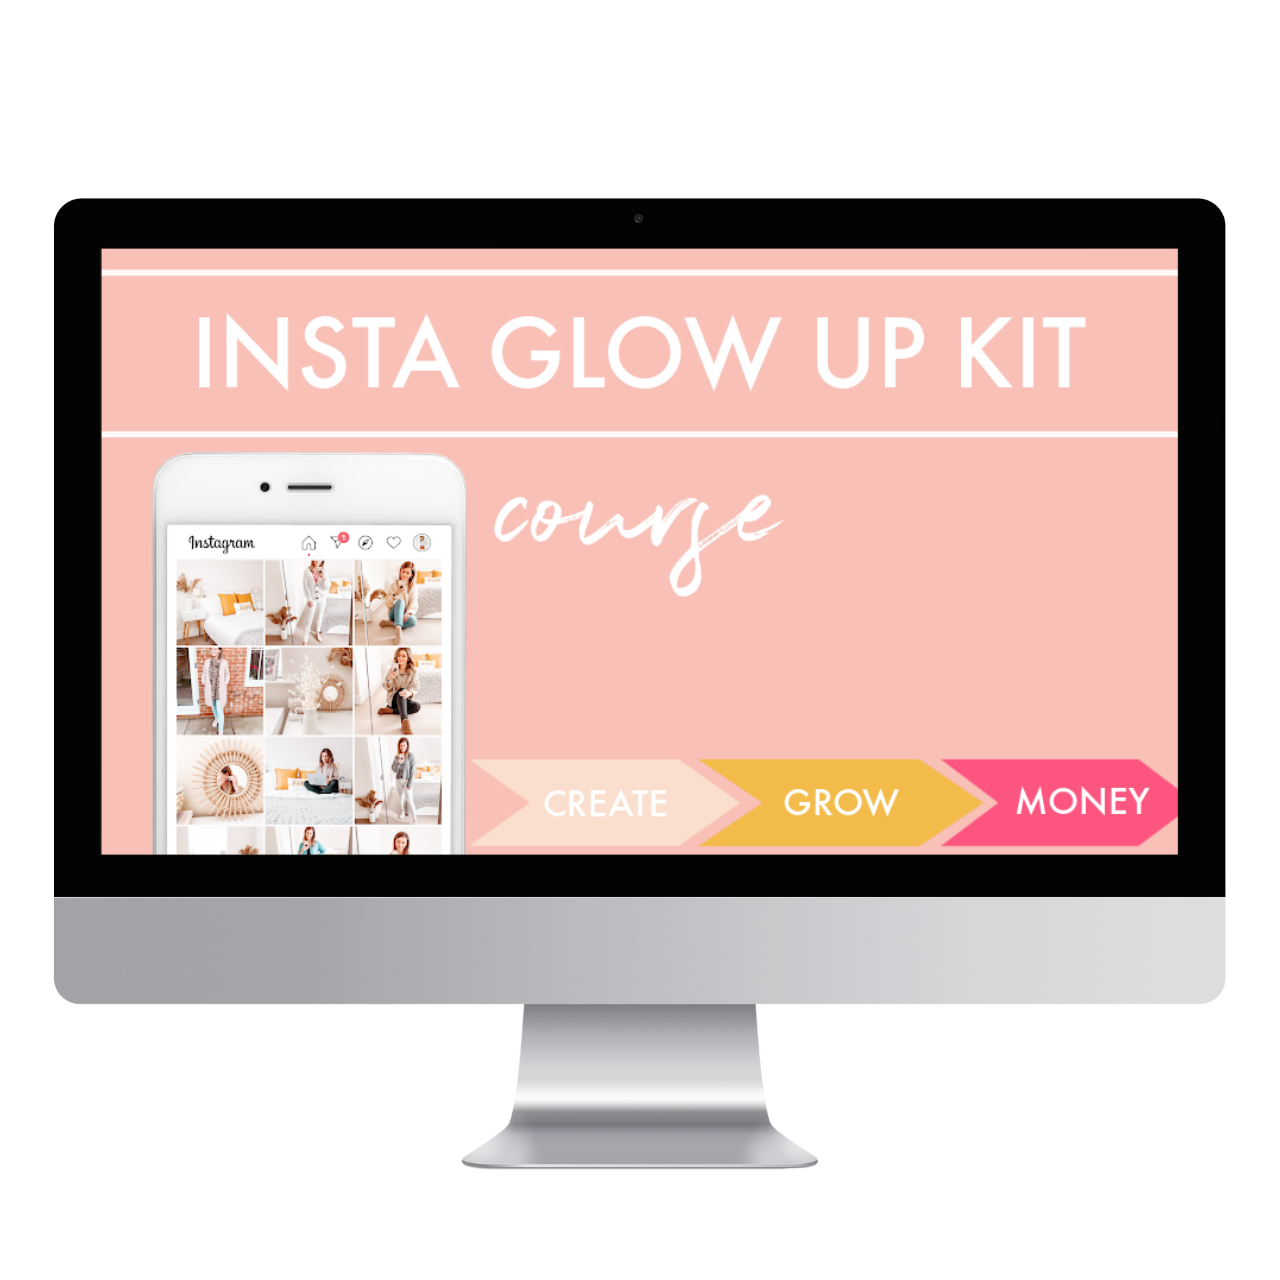 Insta Glow Up Kit course Black Friday deal
